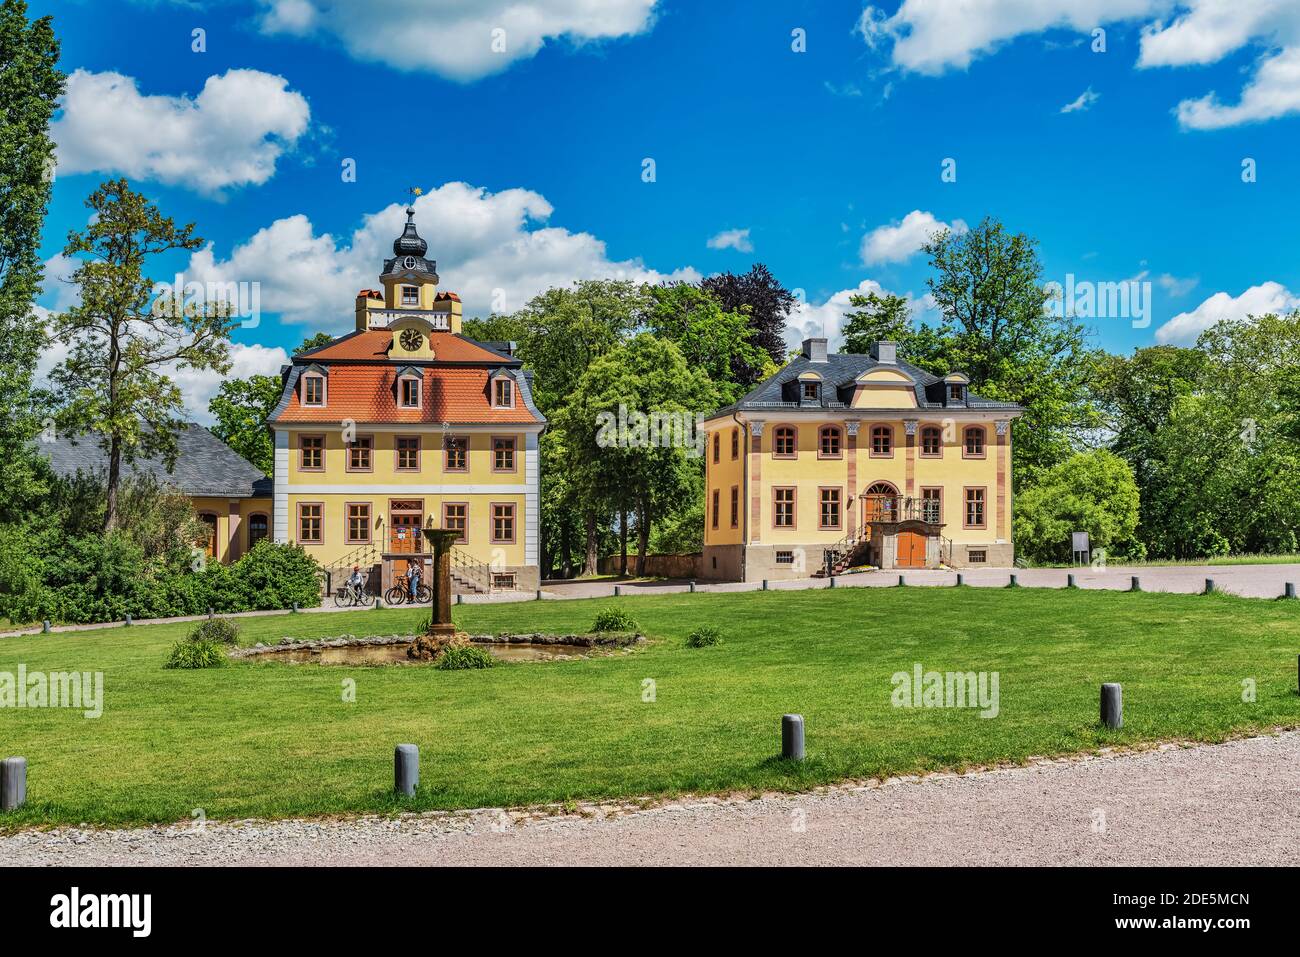 Cavalier houses in the Belvedere Palace, Weimar, Thuringia, Germany, Europe Stock Photo